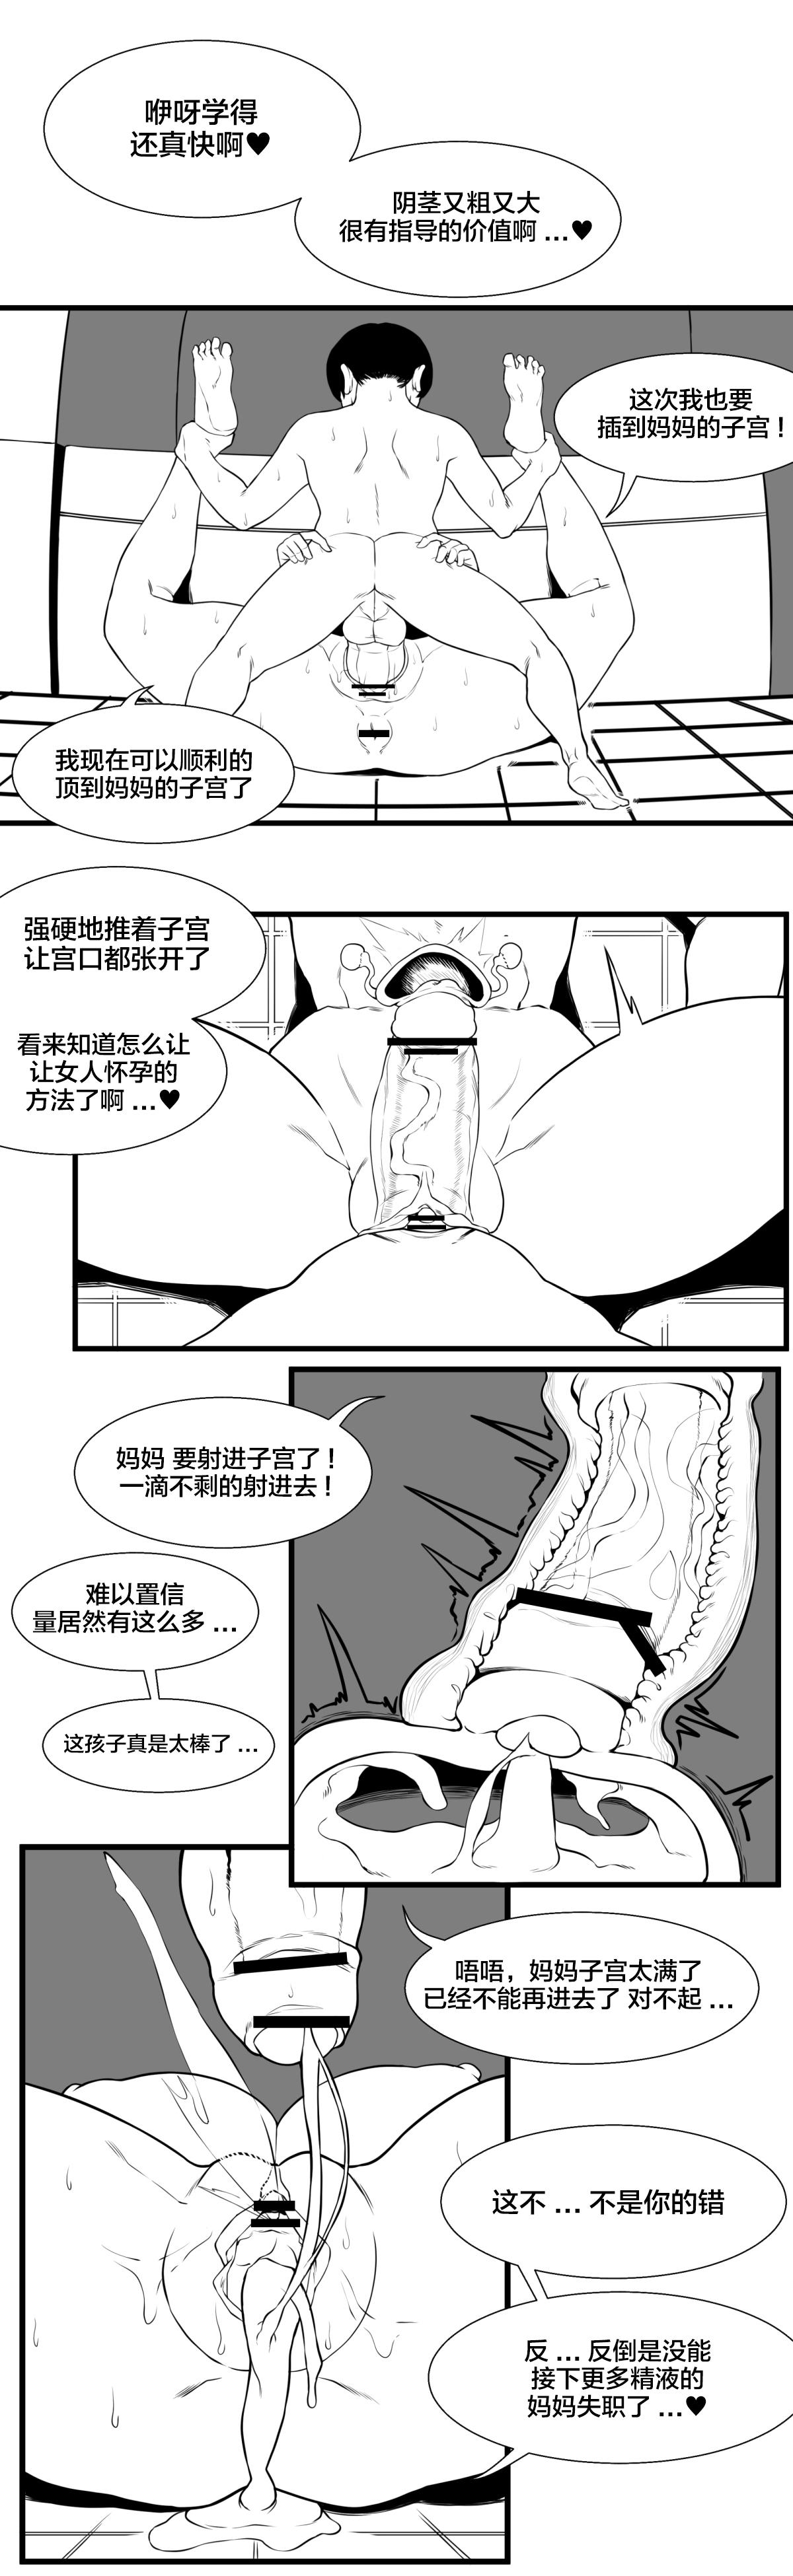 Footjob 용엄마와 비밀상담 - World of warcraft Relax - Page 6